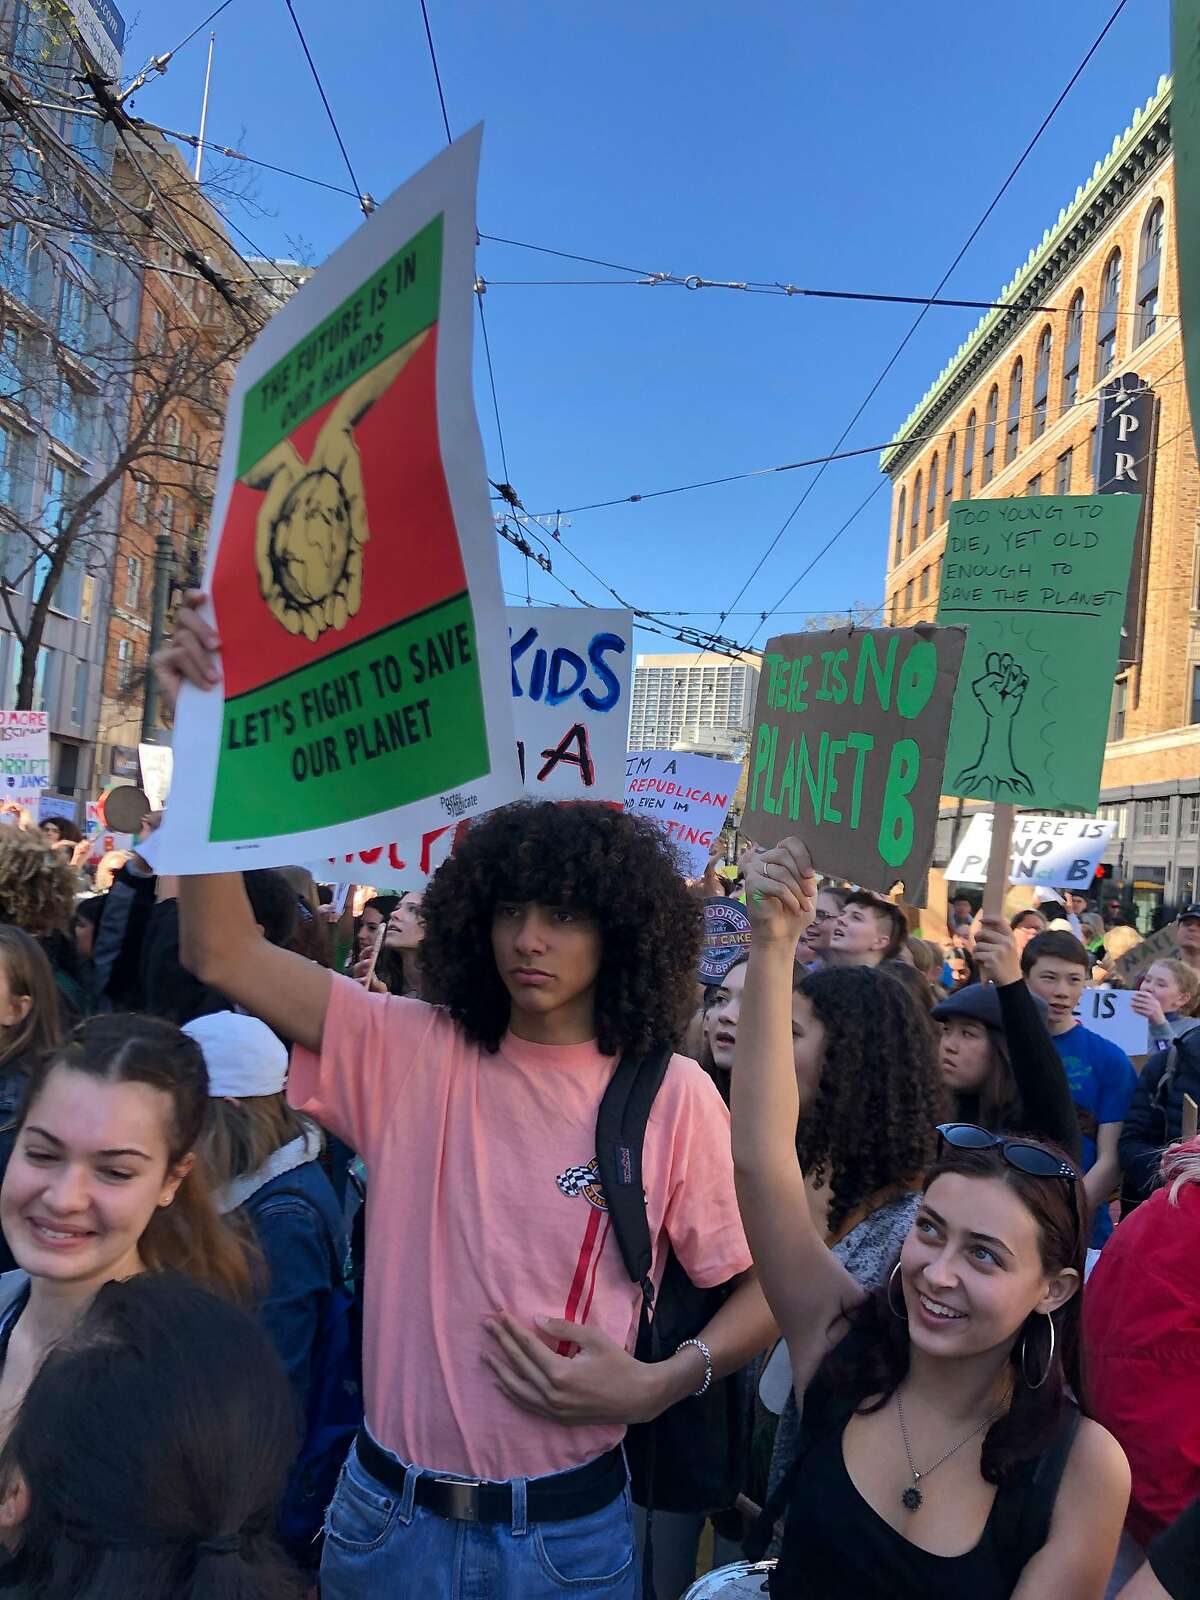 Students walked out of class on Friday, March 15, 2019 to participate in a nationwide coordinated protest against what they perceive as a lack of action on the part of politicians to address climate change. The students were photographed as they marched along Market Street with an ultimate destination of Nancy Pelosi's San Francisco field office.